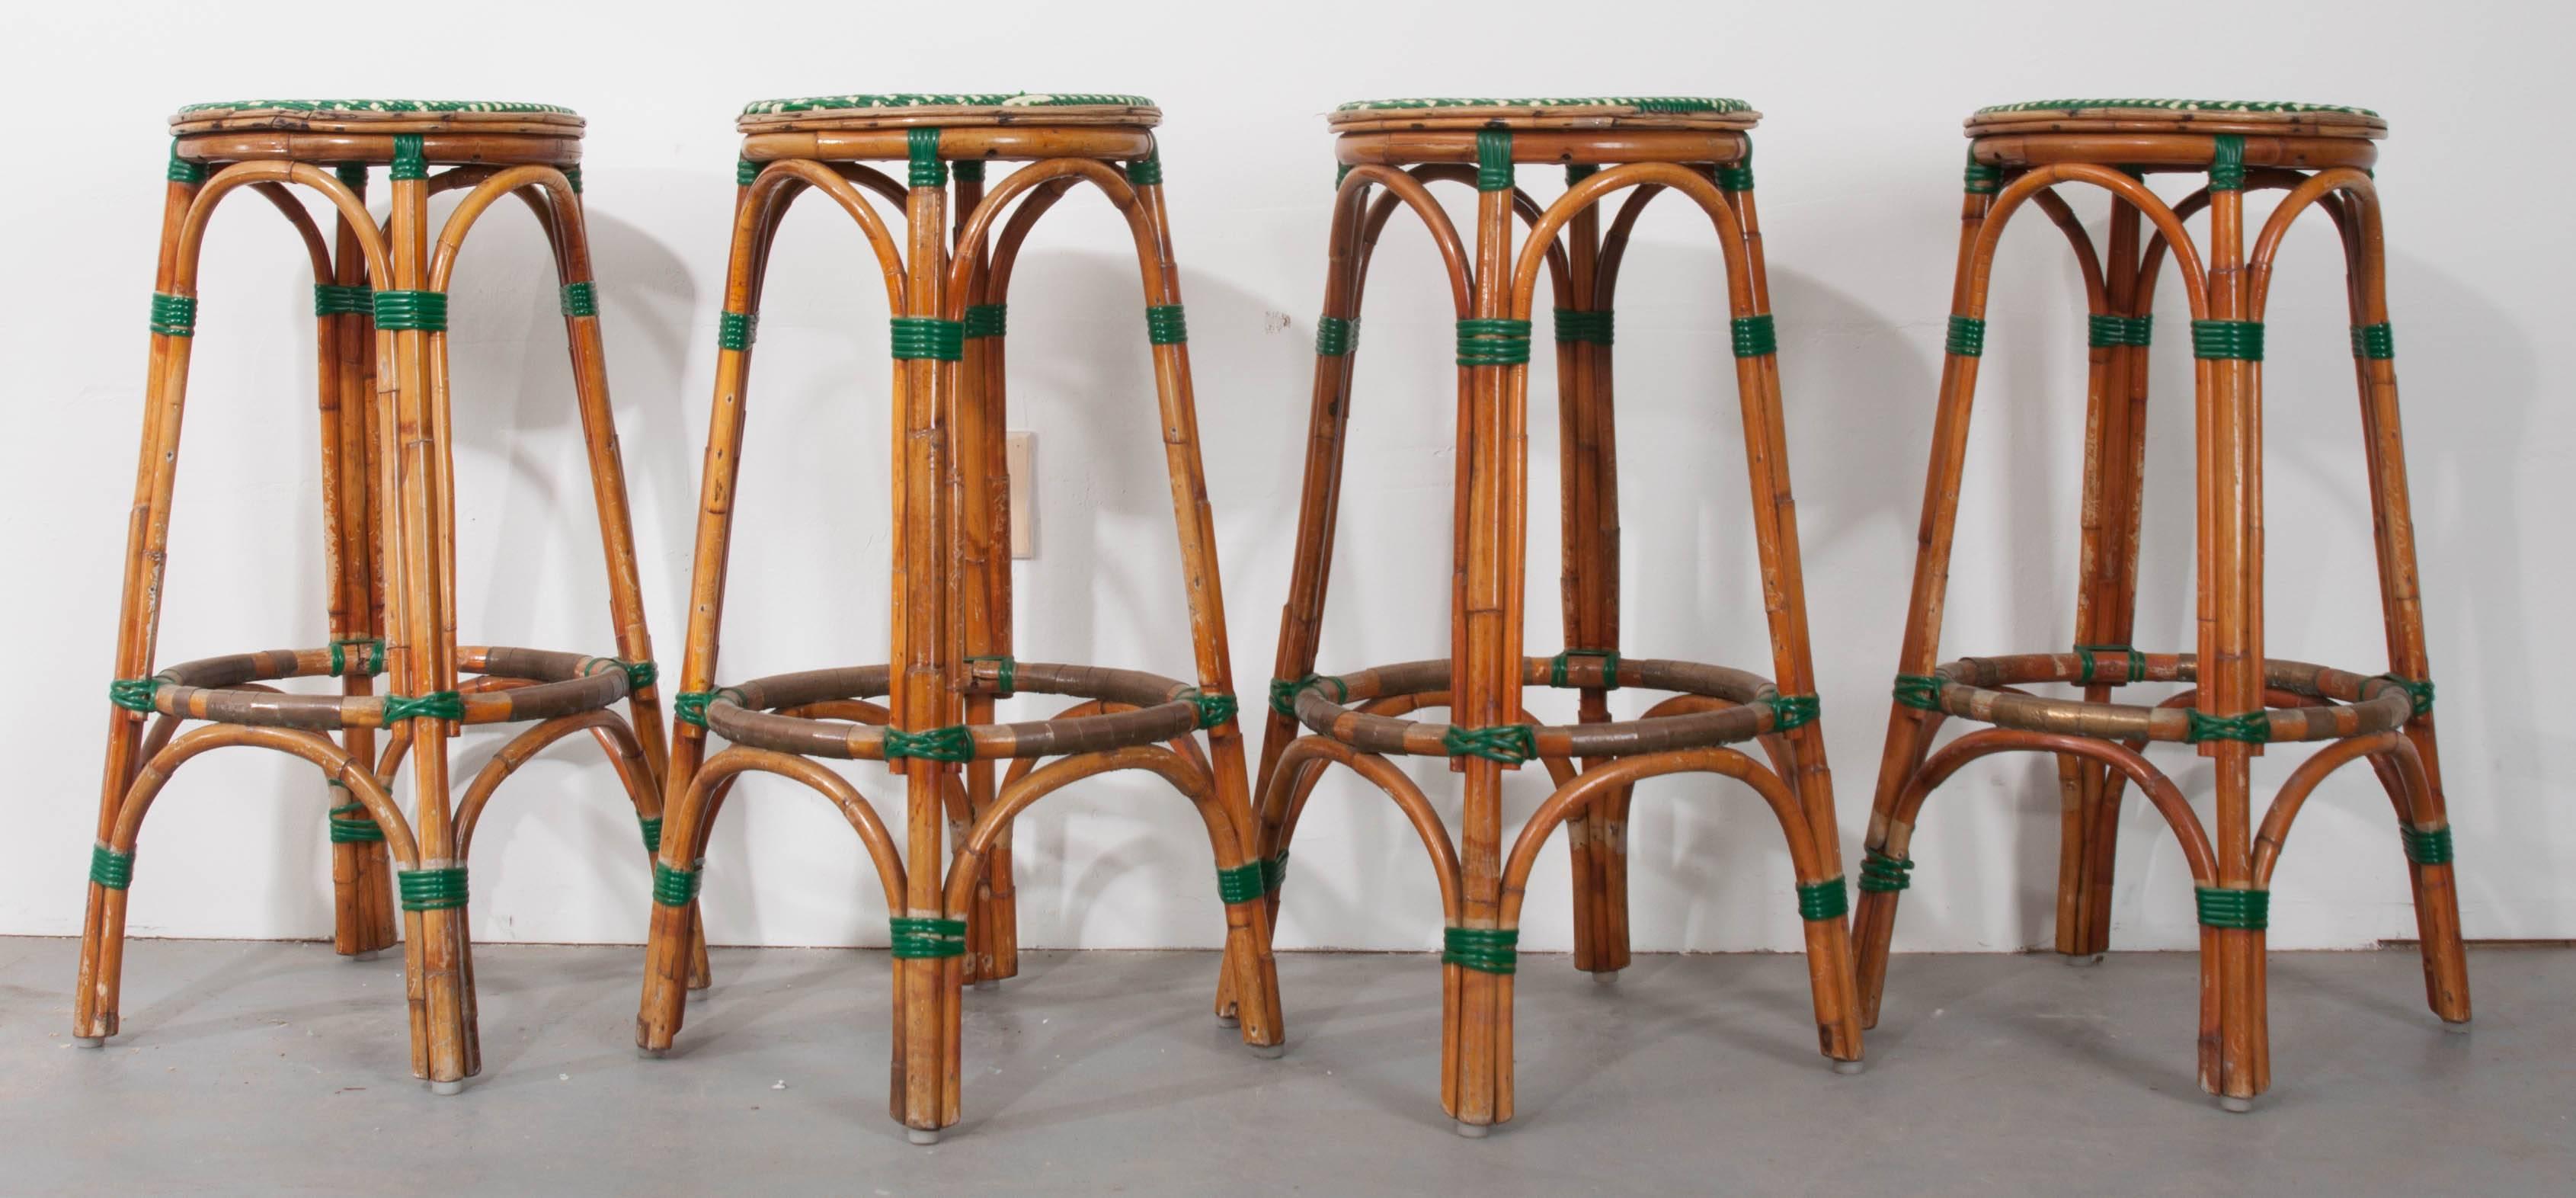 A fabulous pair of two French vintage rattan bar stools with green and ivory seats and matching green banding to stabilize their bases. The Classic style of these bistro stools is quintessentially French. Measures: The stools have seats with a